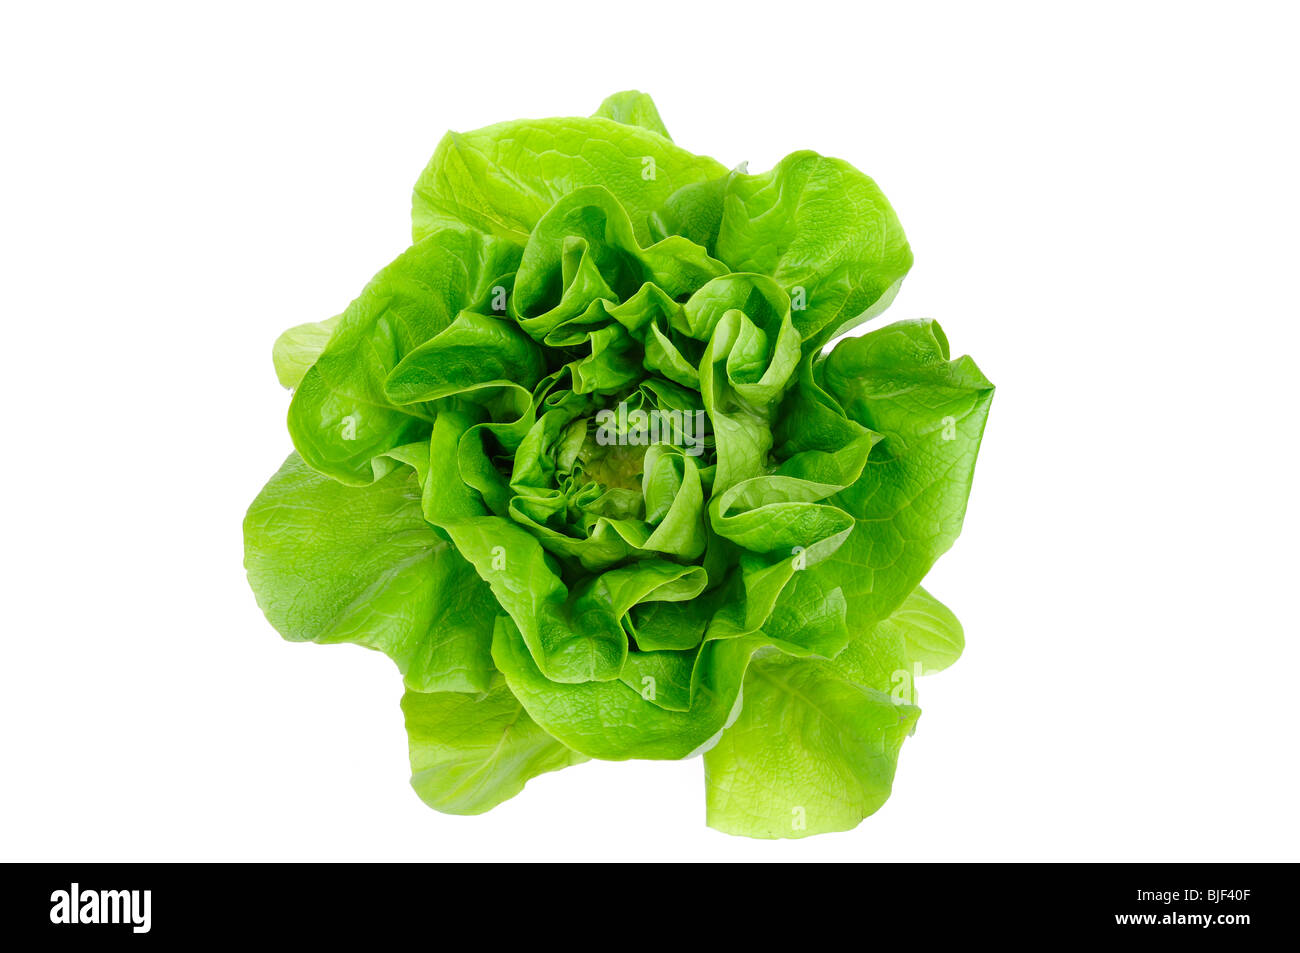 Green lettuce isolated on the white background. Stock Photo